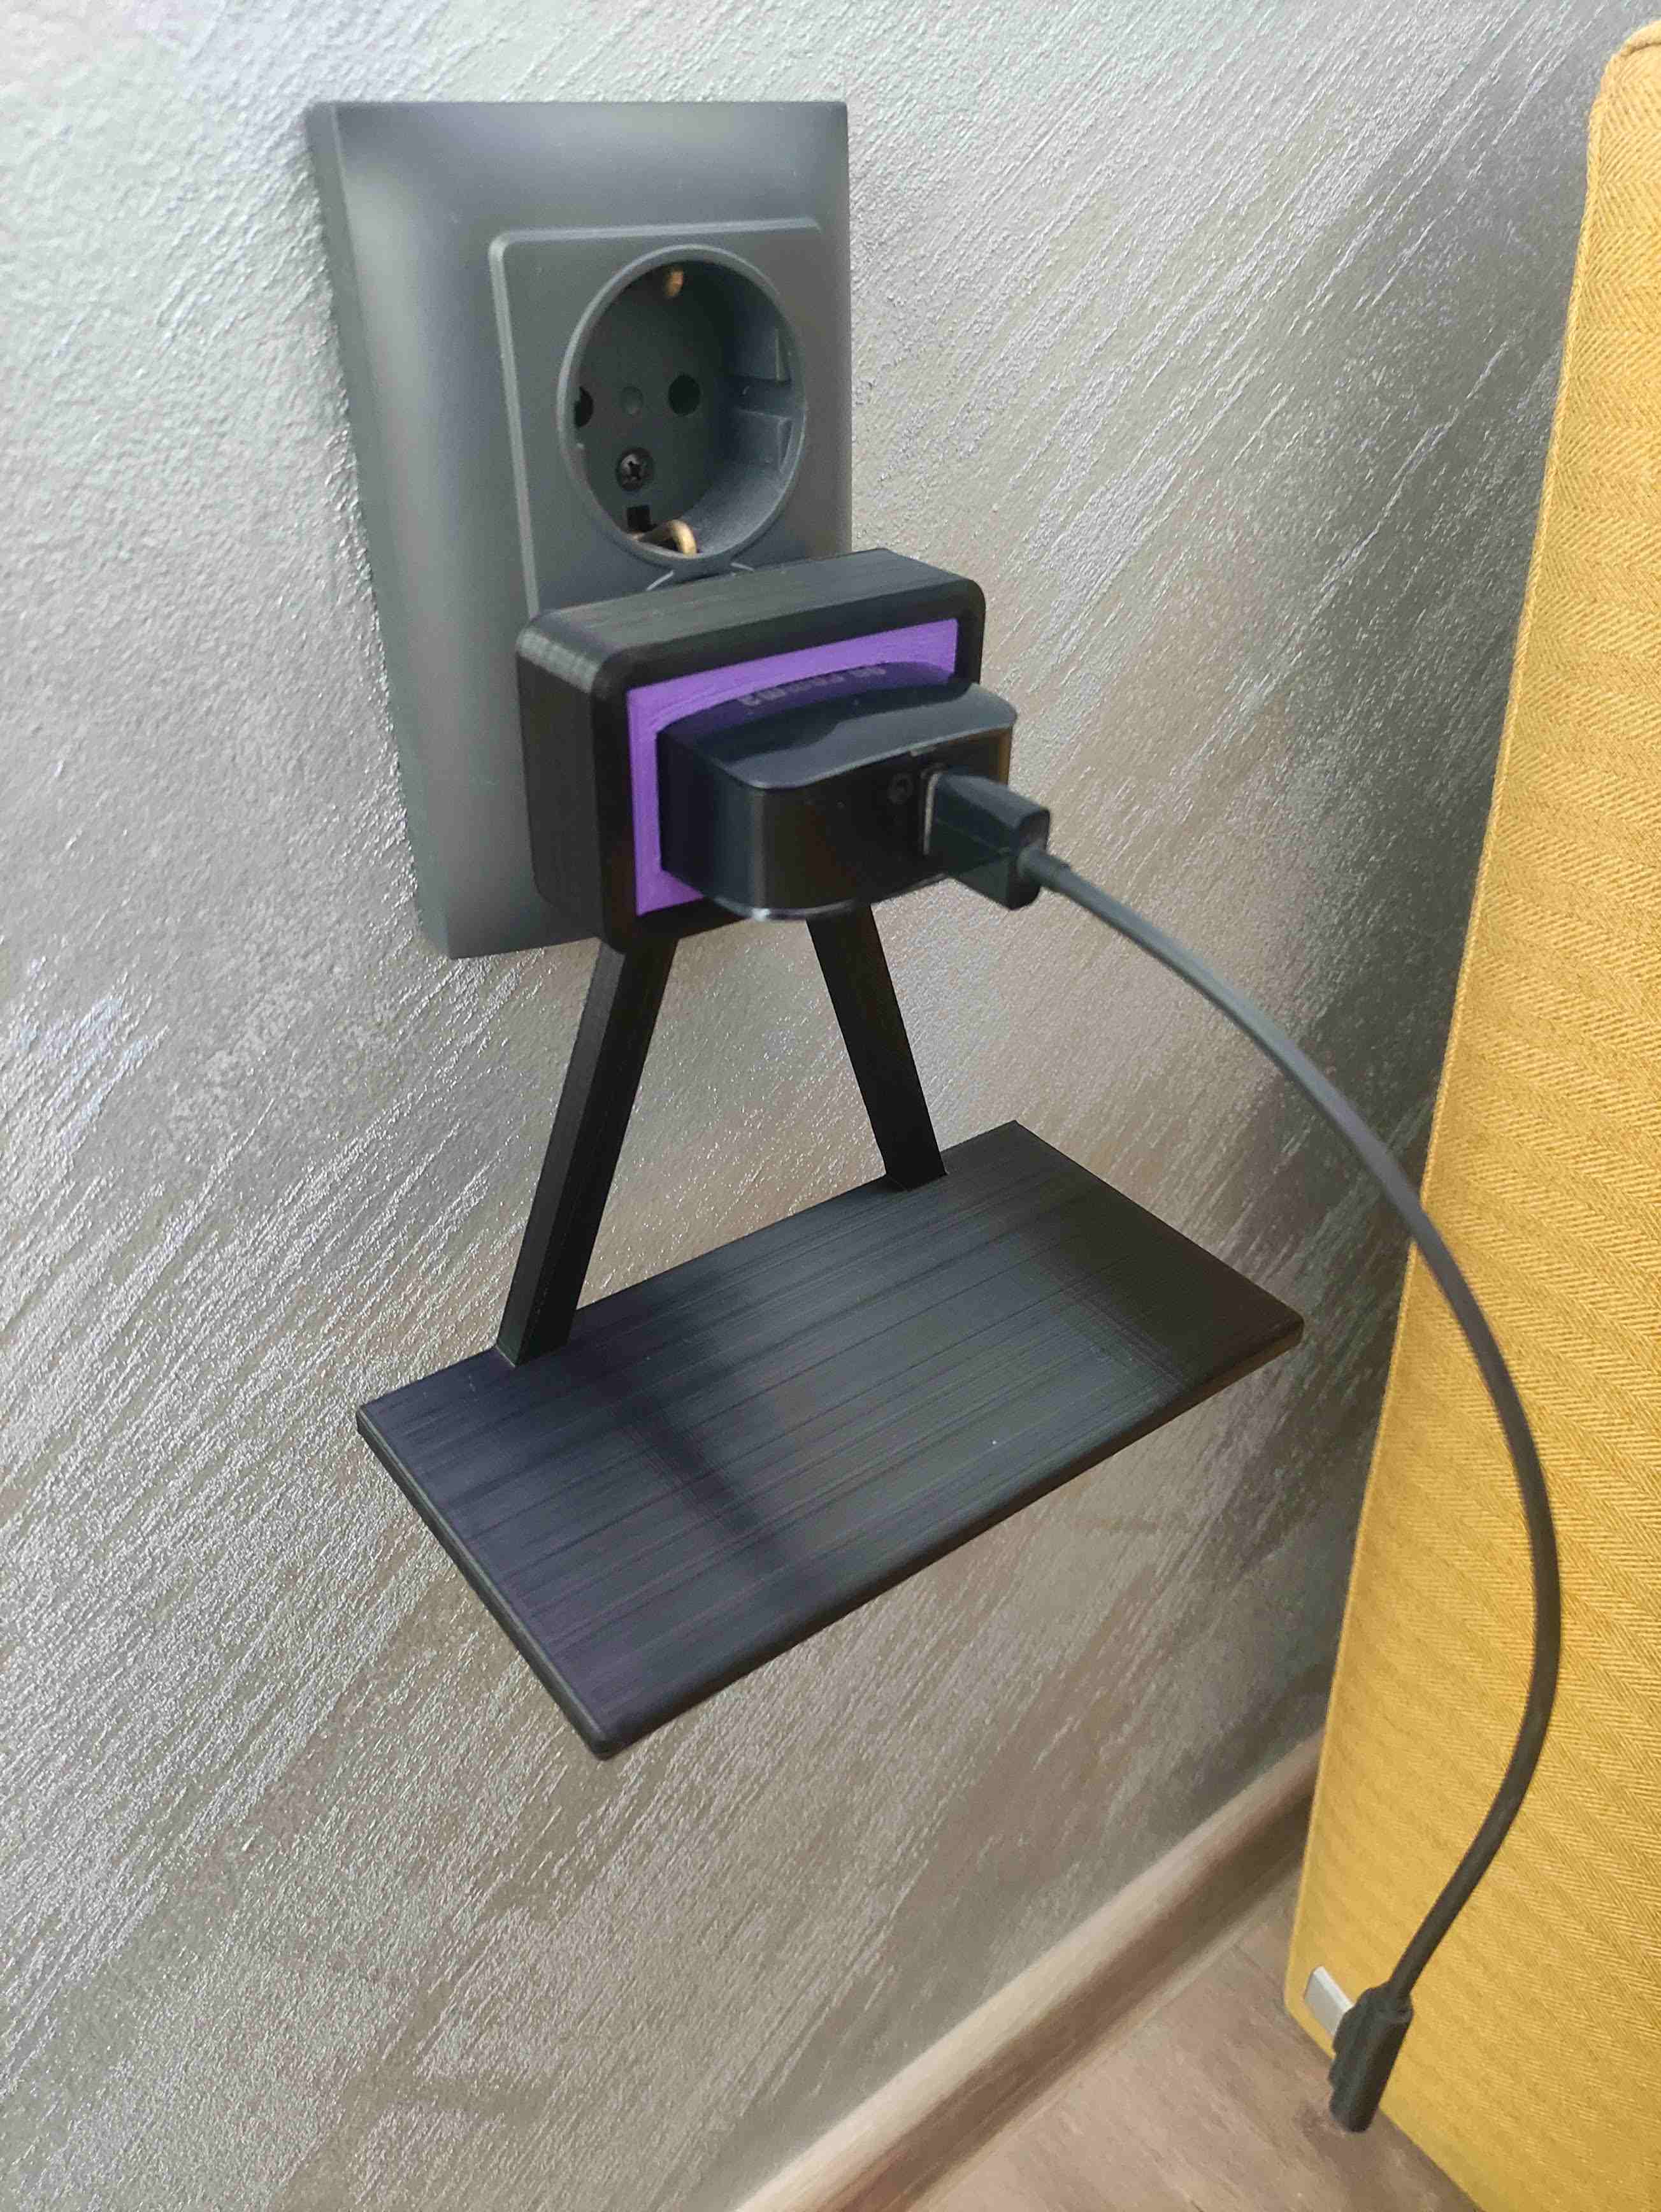 Wall outlet phone charging stand mounted over the charger